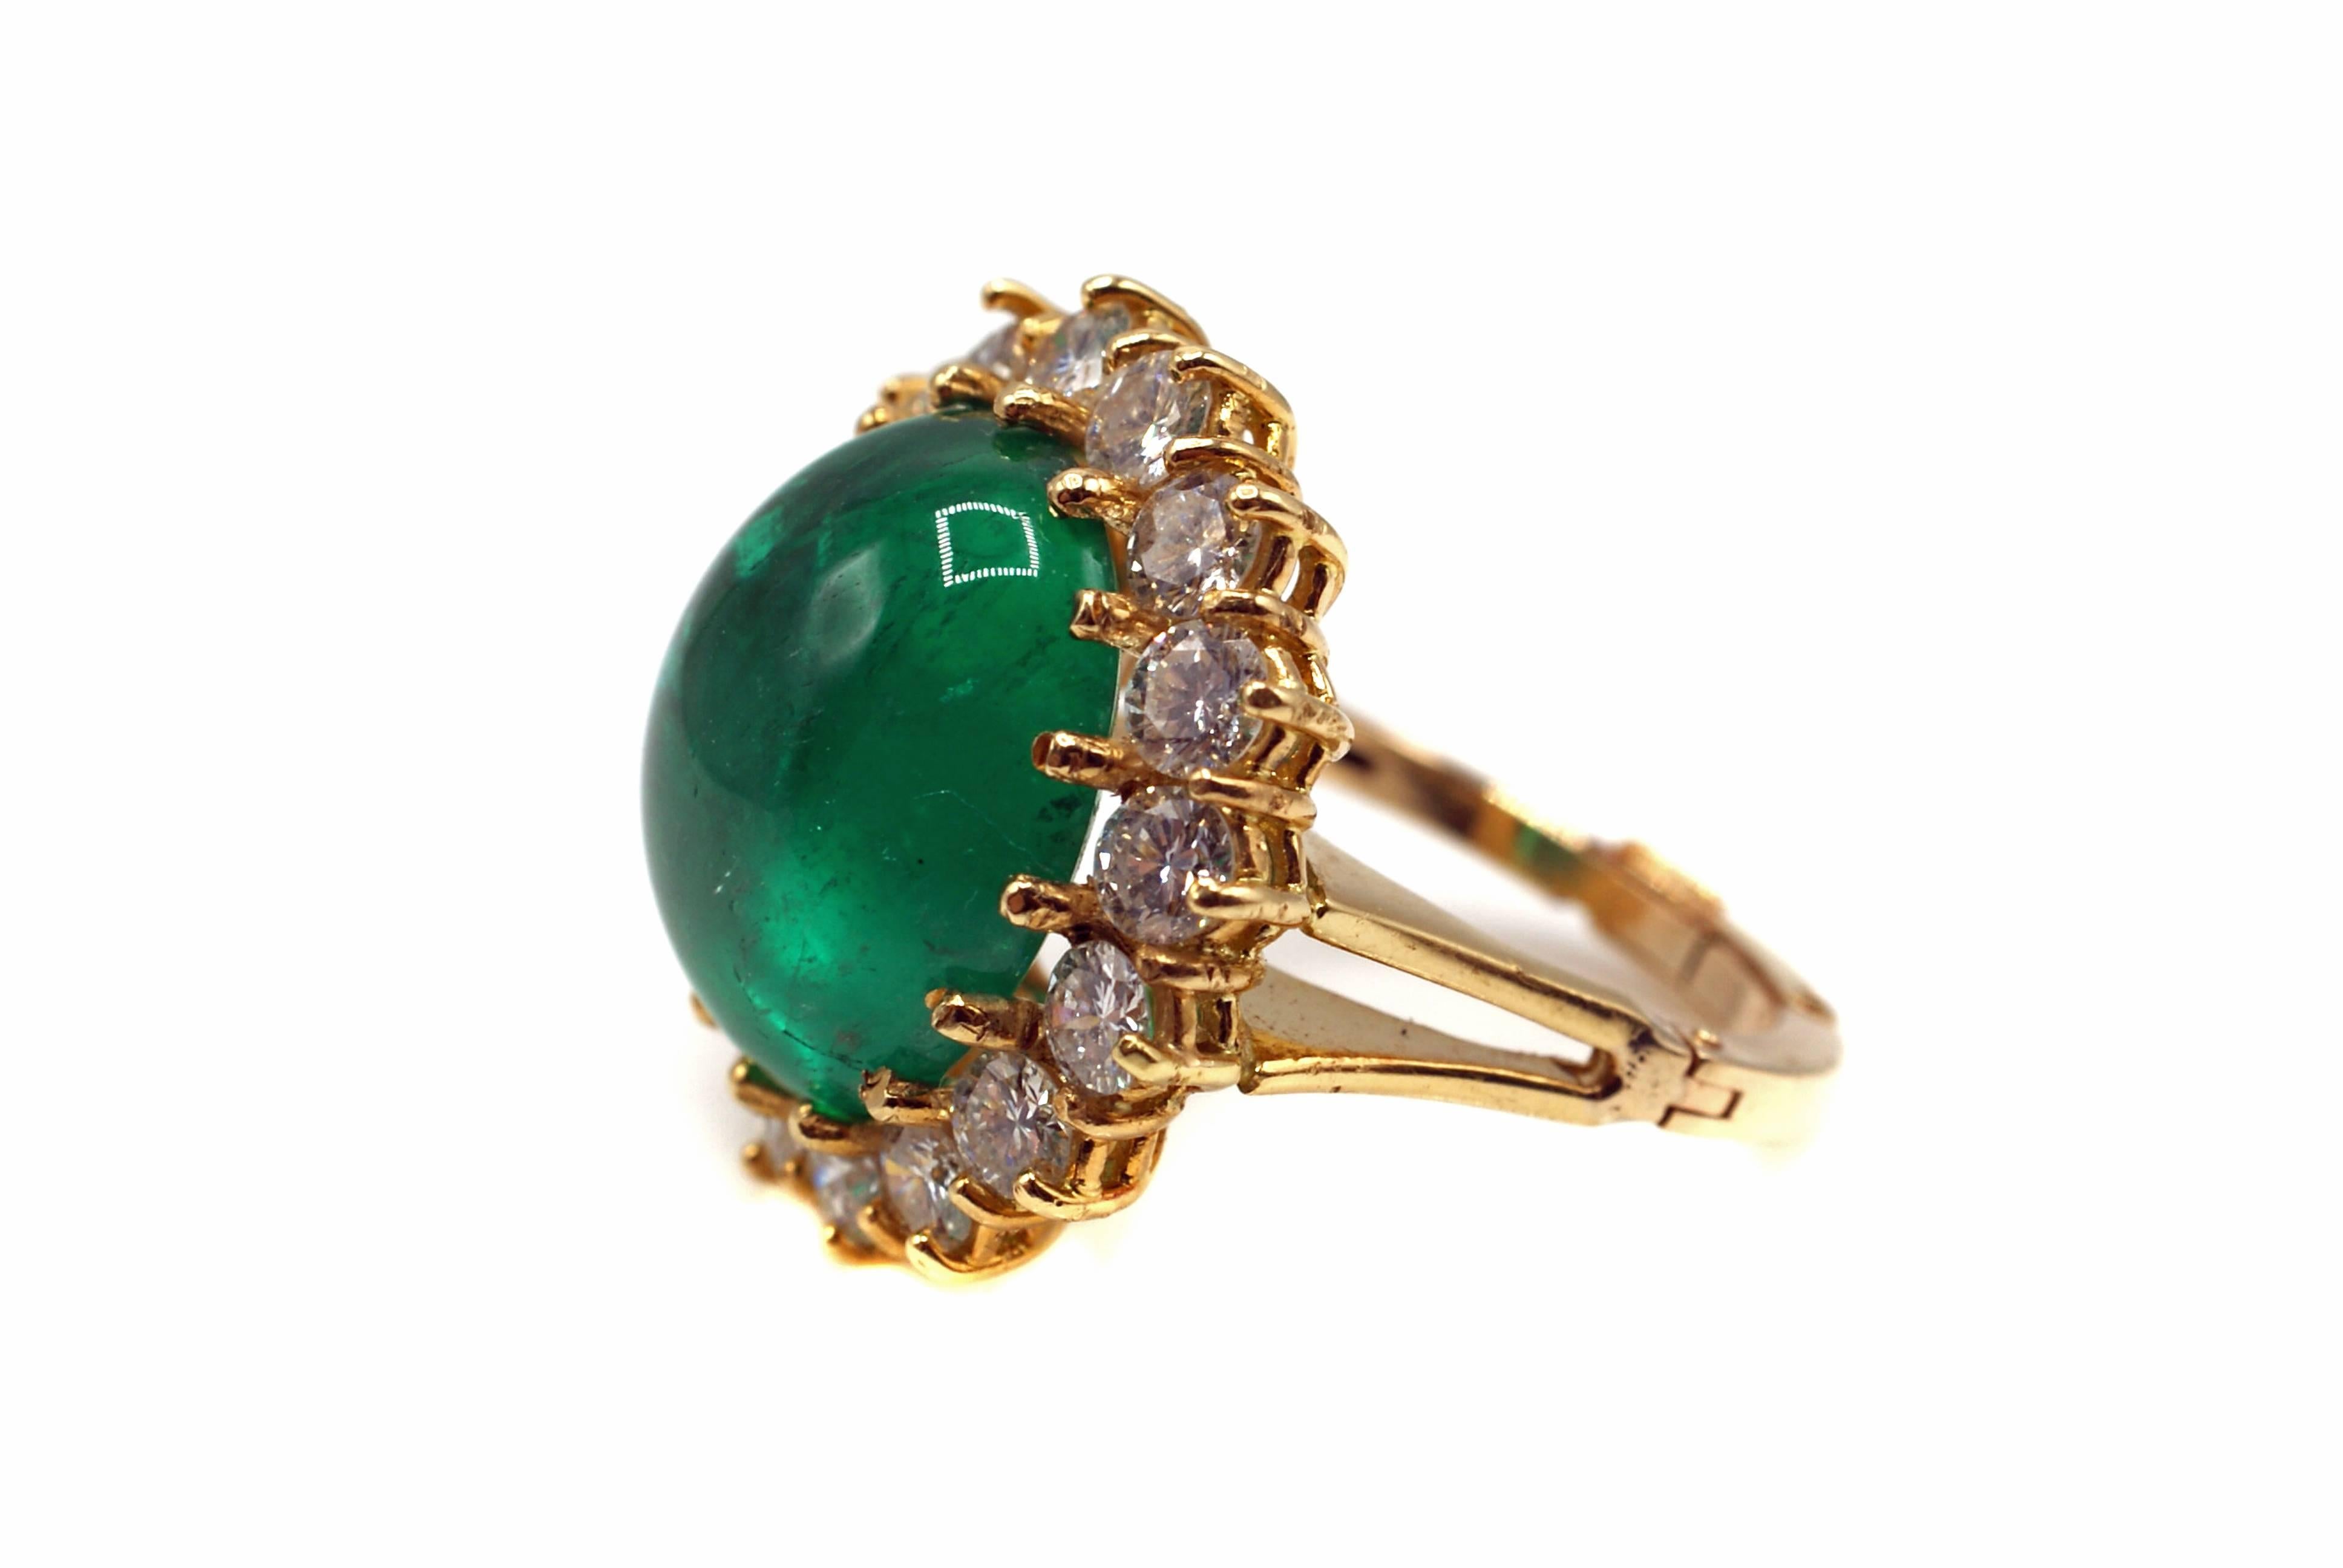 Amazing forest green Colombian cabochon emerald and diamond gold ring. The perfectly cut oval cabochon is accompanied by a report from the AGL ( American Gemological Laboratory ) which states that the origin is Colombia and the treatment is minor